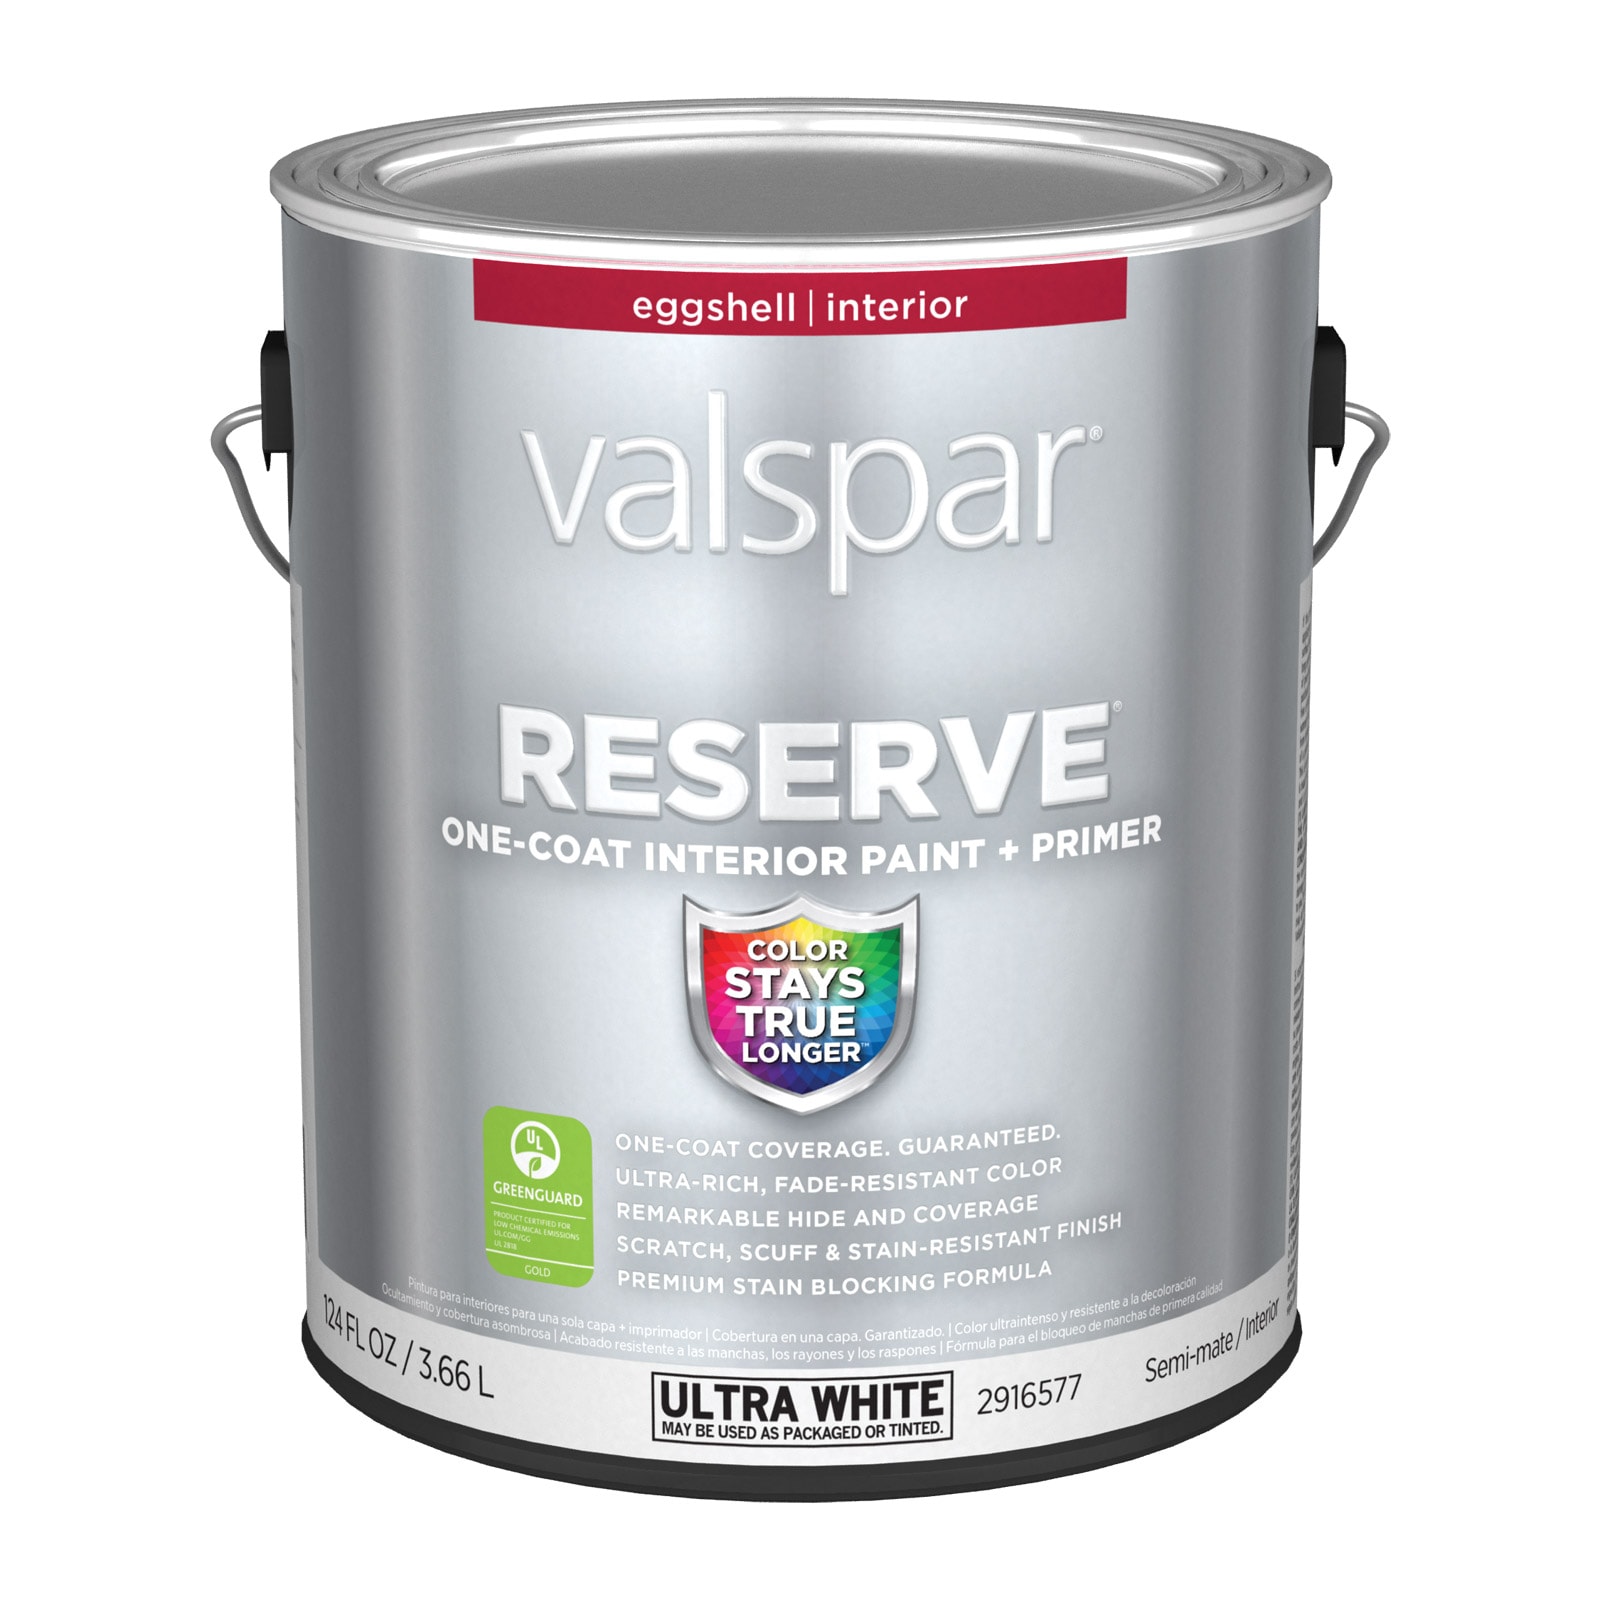 Valspar paint crystals. Found at Lowes. I used walmart paint. Stir into  your paint right before use. Adds beaut…